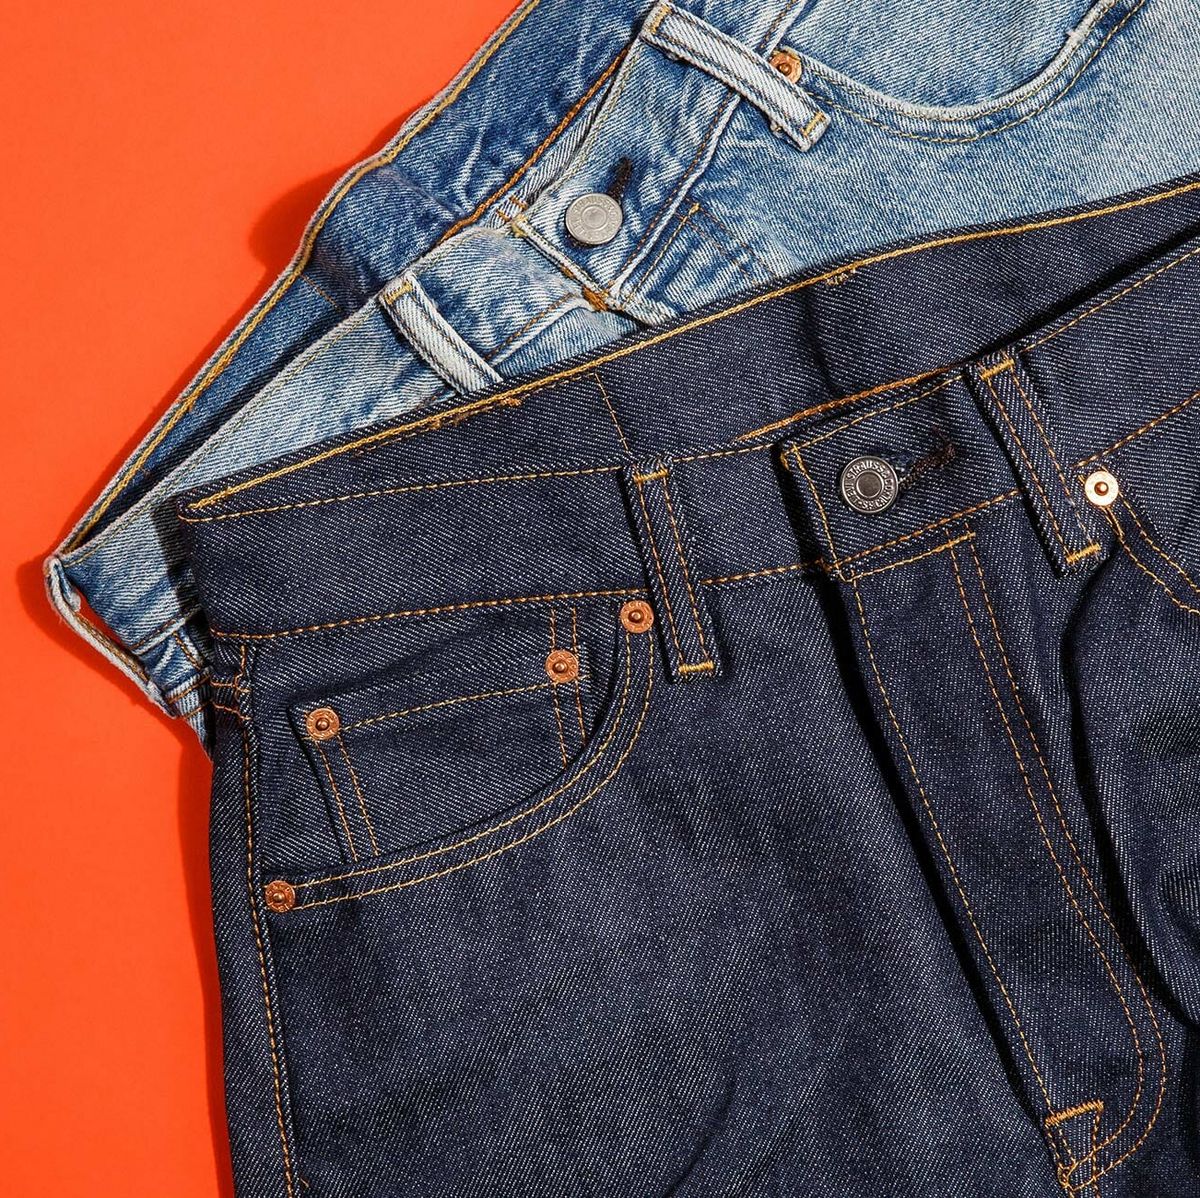 Verwaarlozing Hassy Vroegst Levi's 501 Review: Is the Original Blue Jean Any Good?